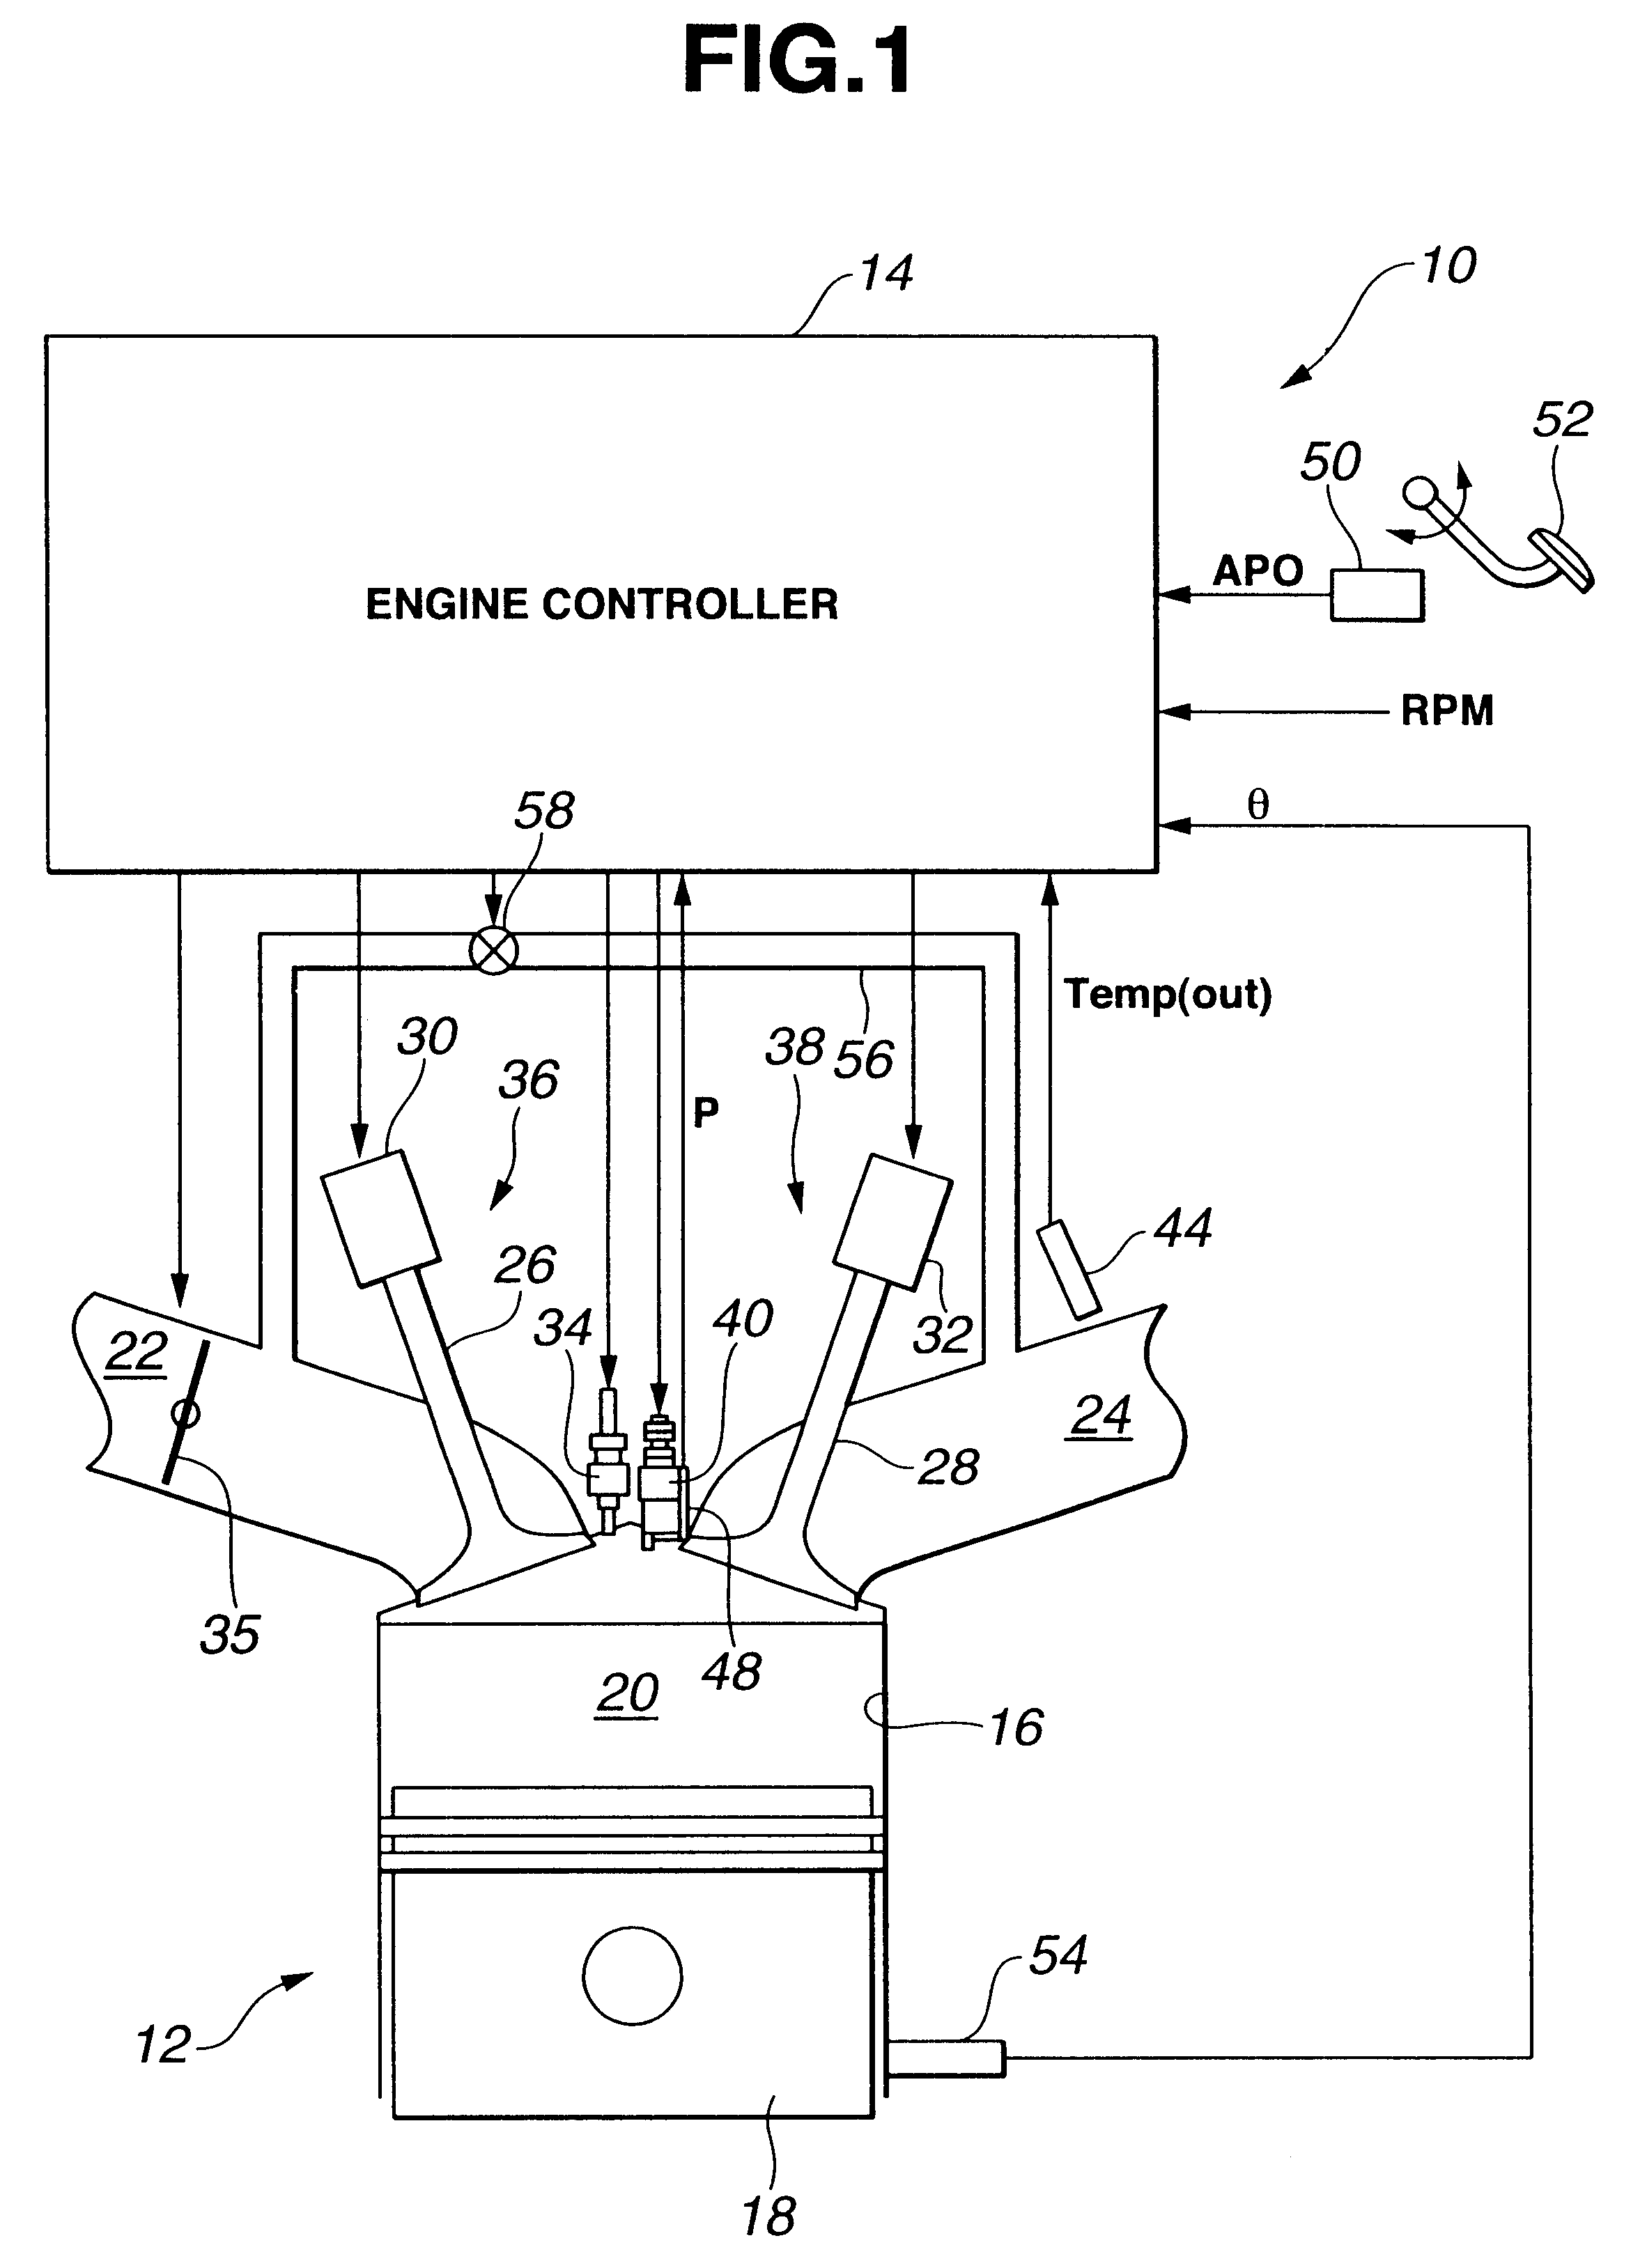 Enhanced multiple injection for auto-ignition in internal combustion engines